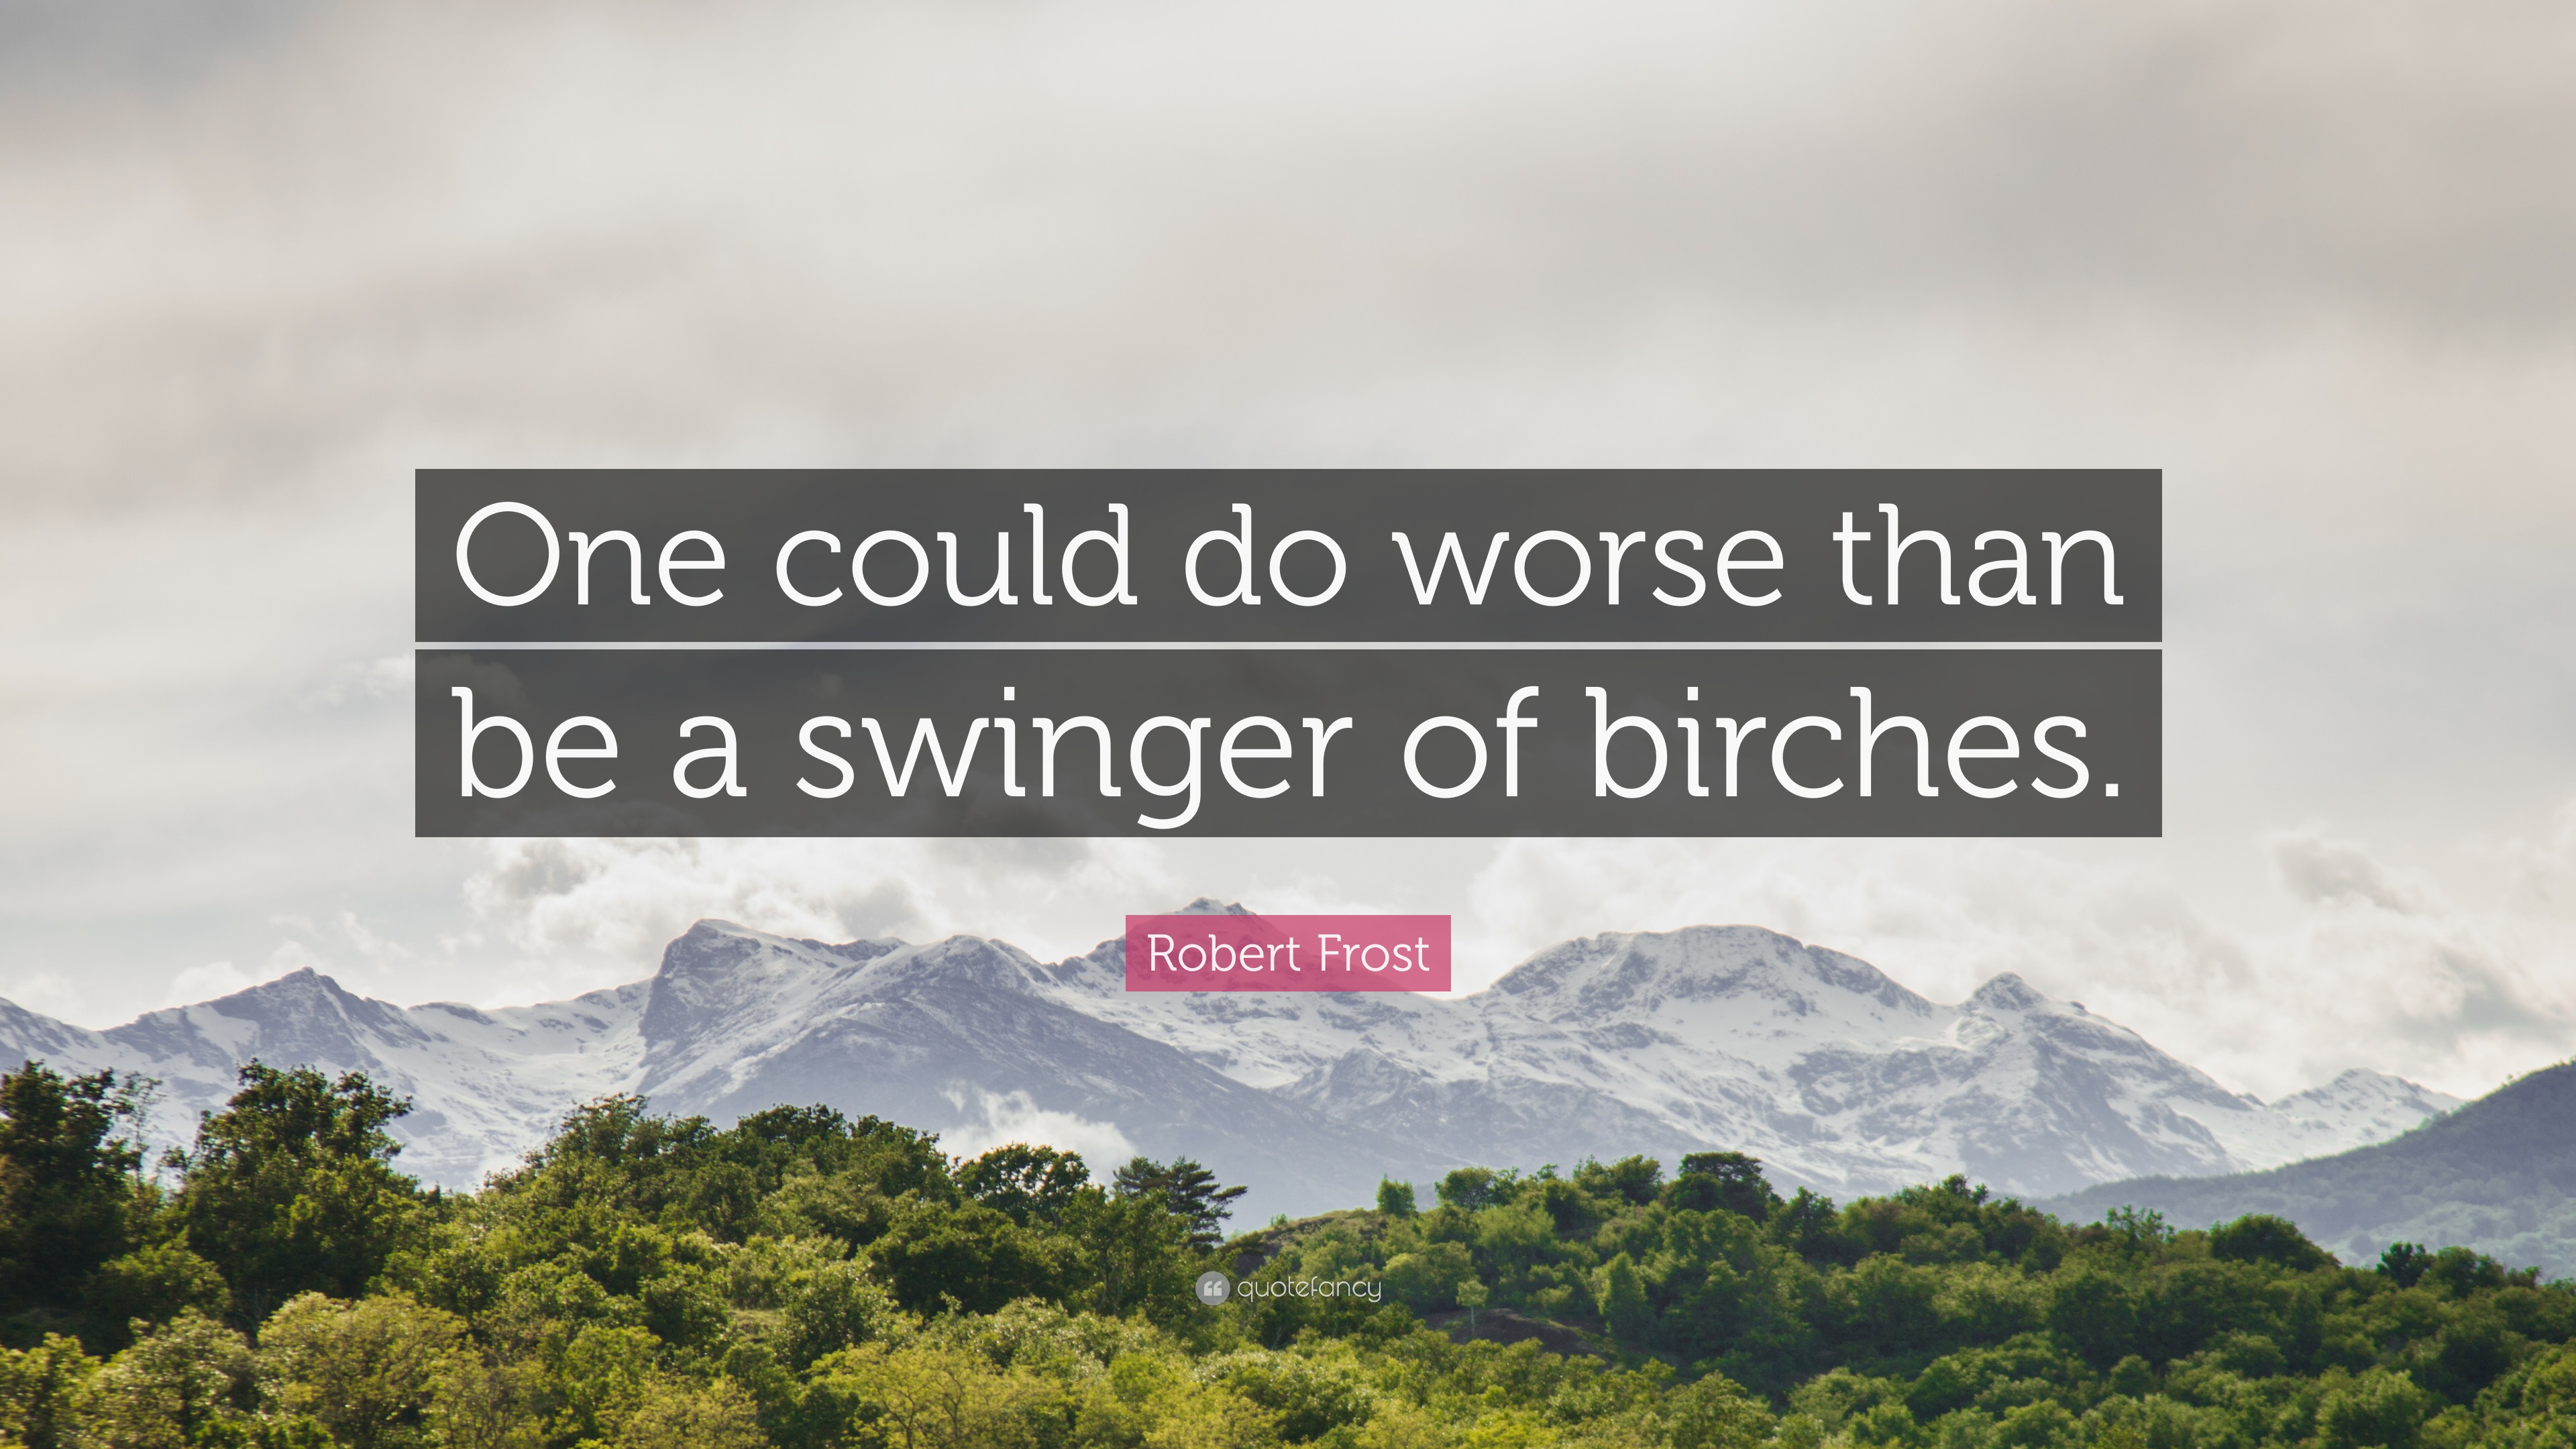 Robert Frost Quote “One could do worse